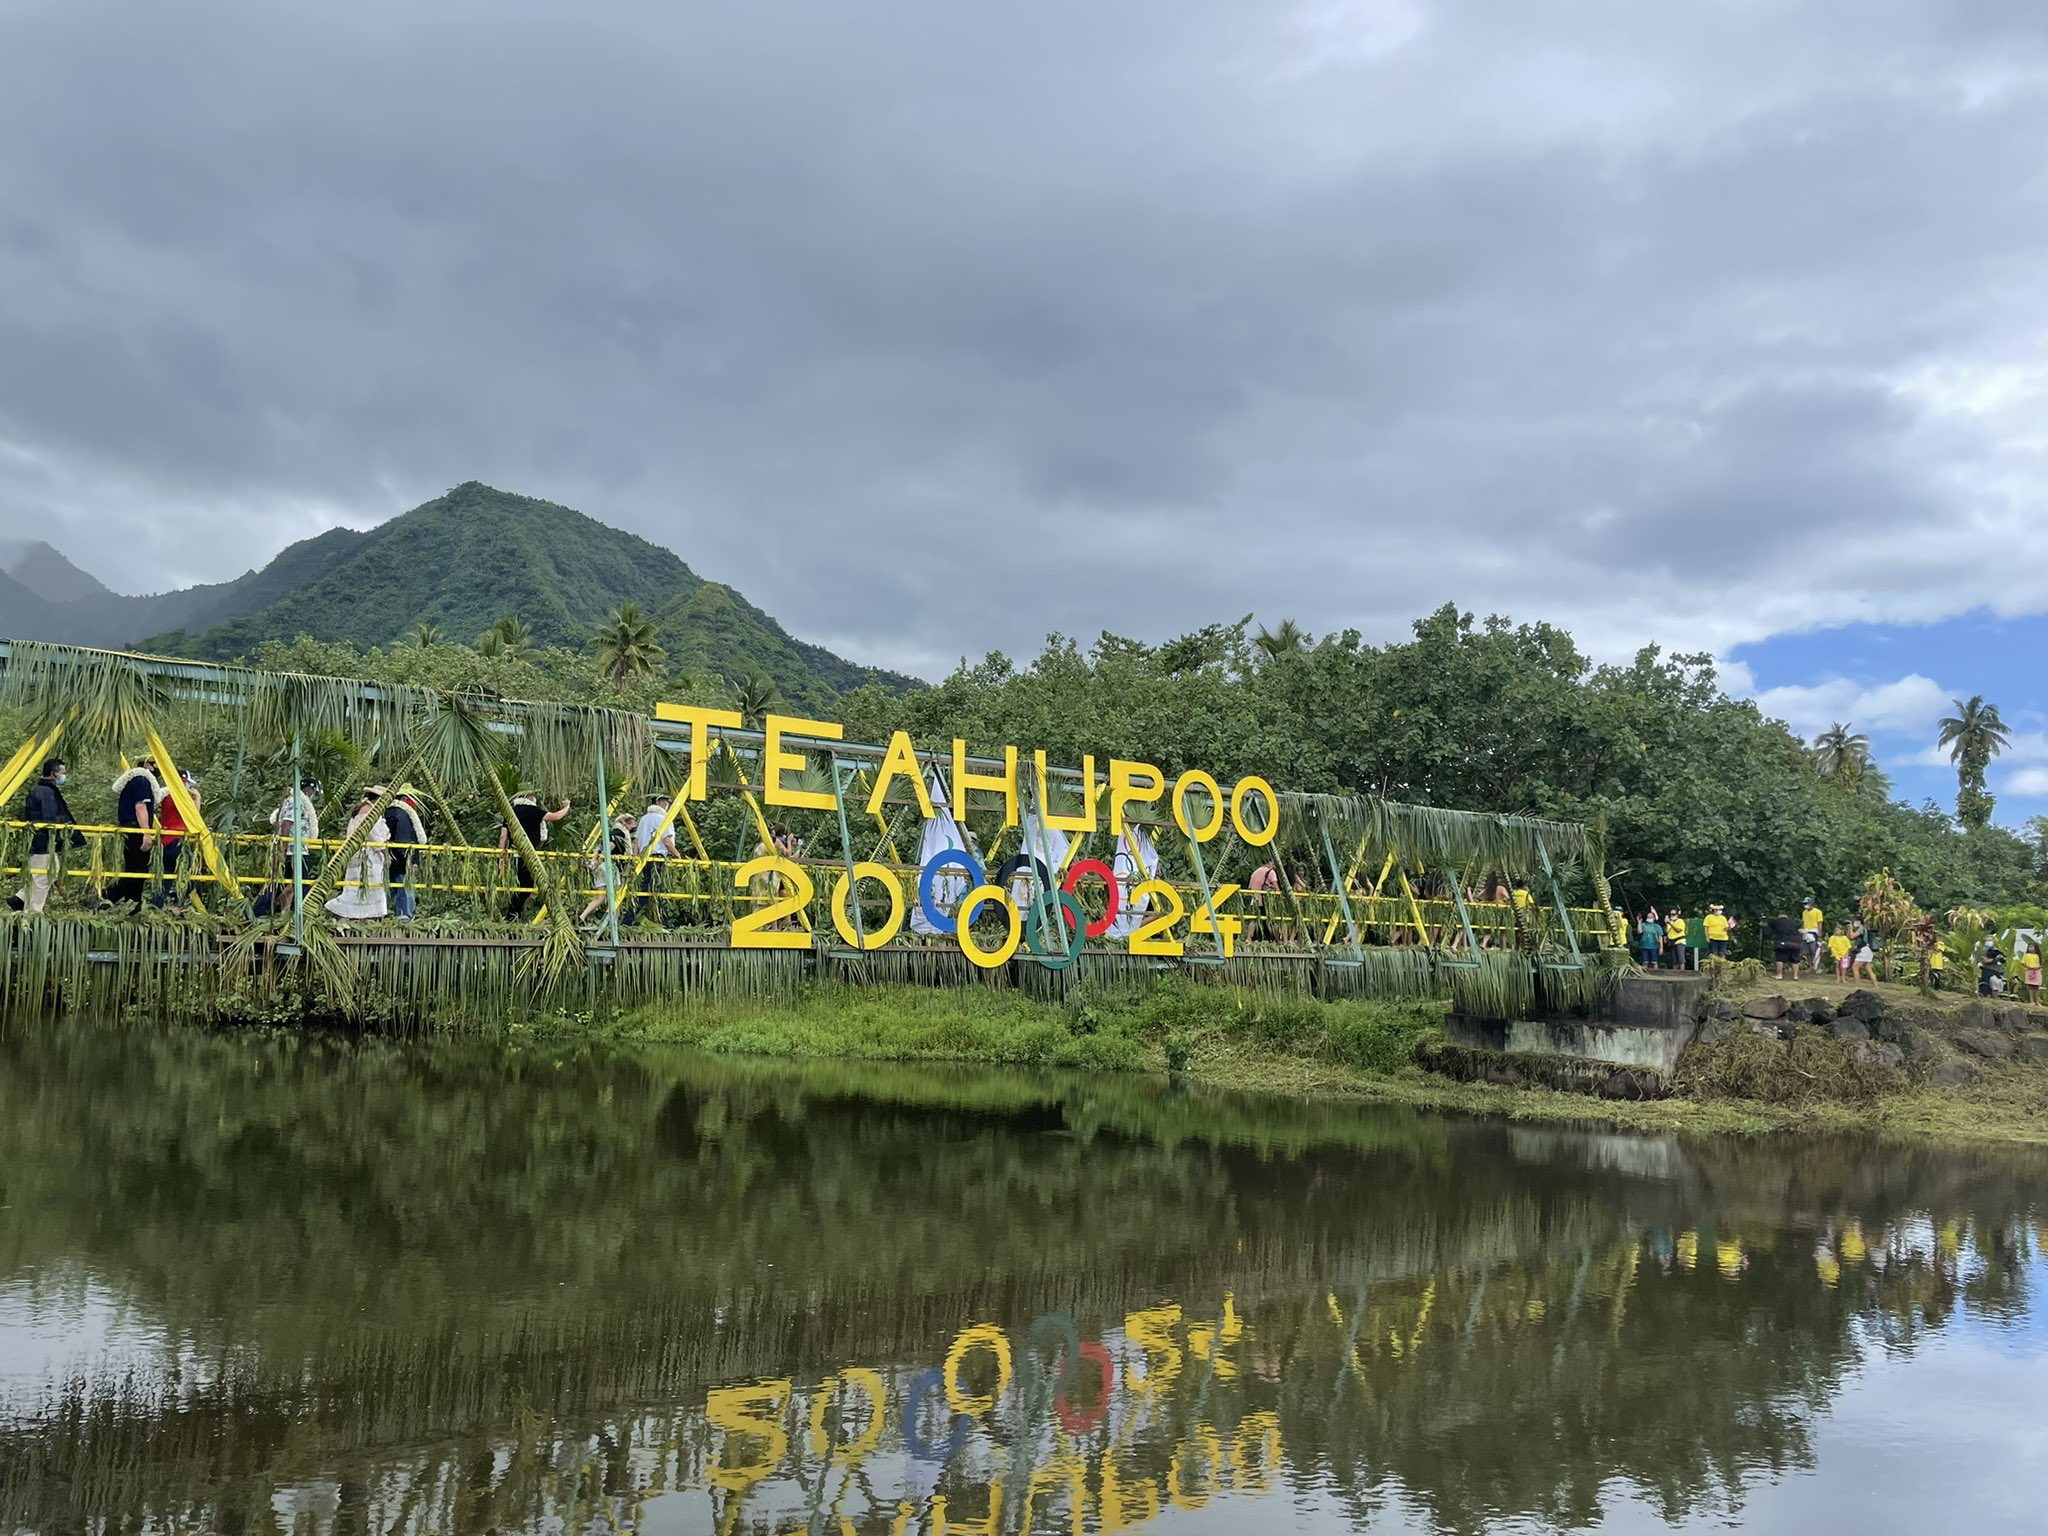 Paris 2024 holds Olympic flag ceremony on final day of visit to Tahiti